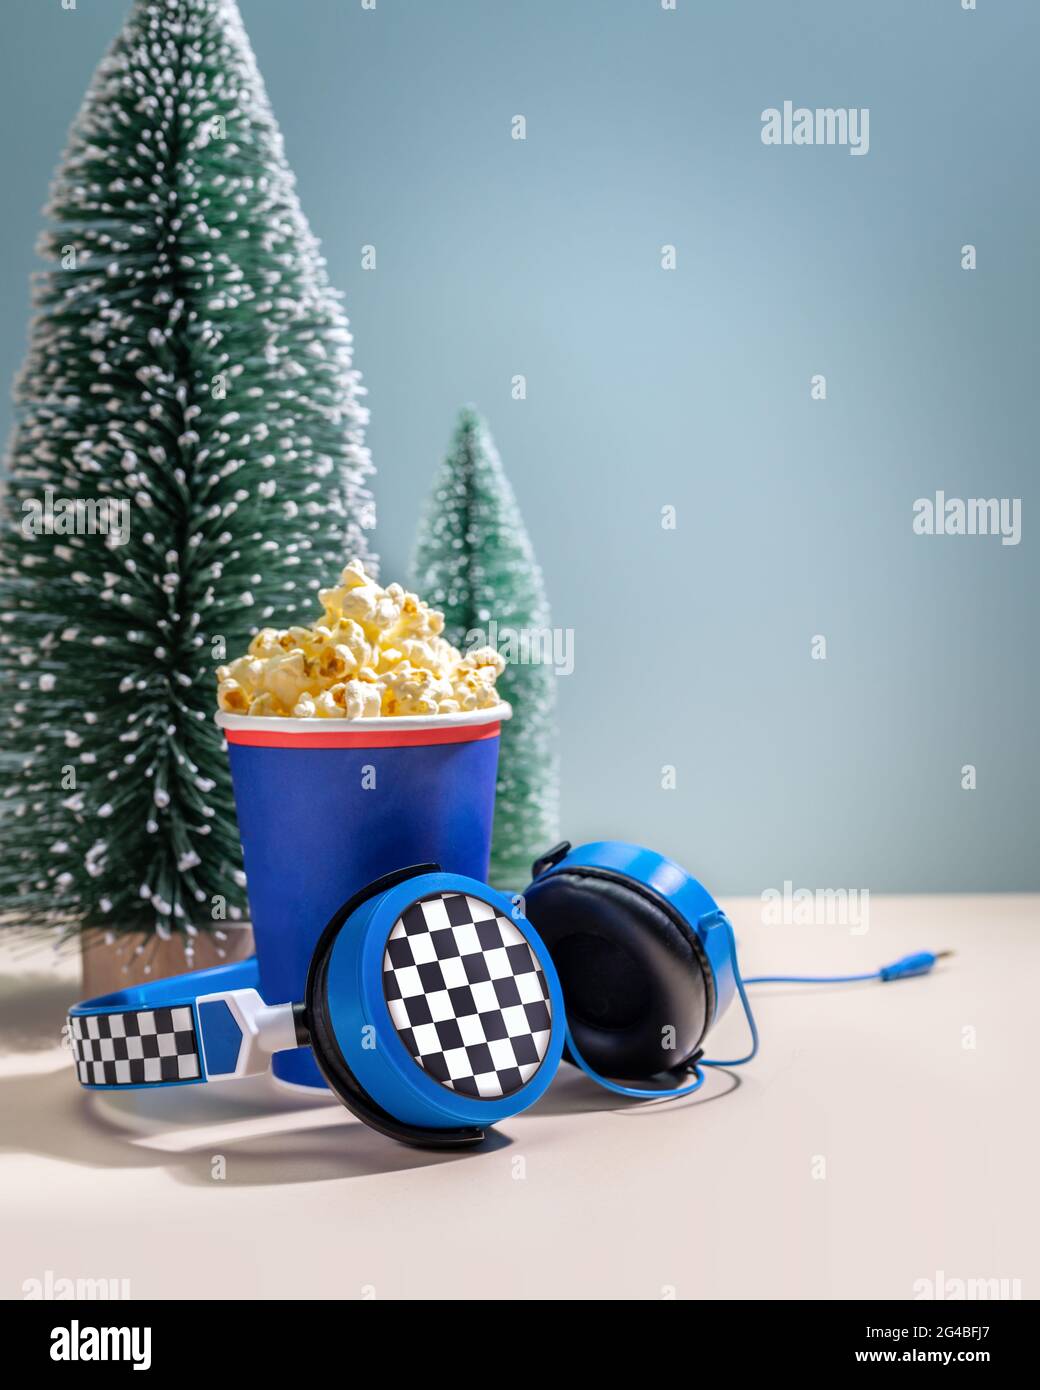 New Year holliday composition with disposable cup with popcorn, headphones and decorative christmas trees. Concept of playing games and watching movie Stock Photo